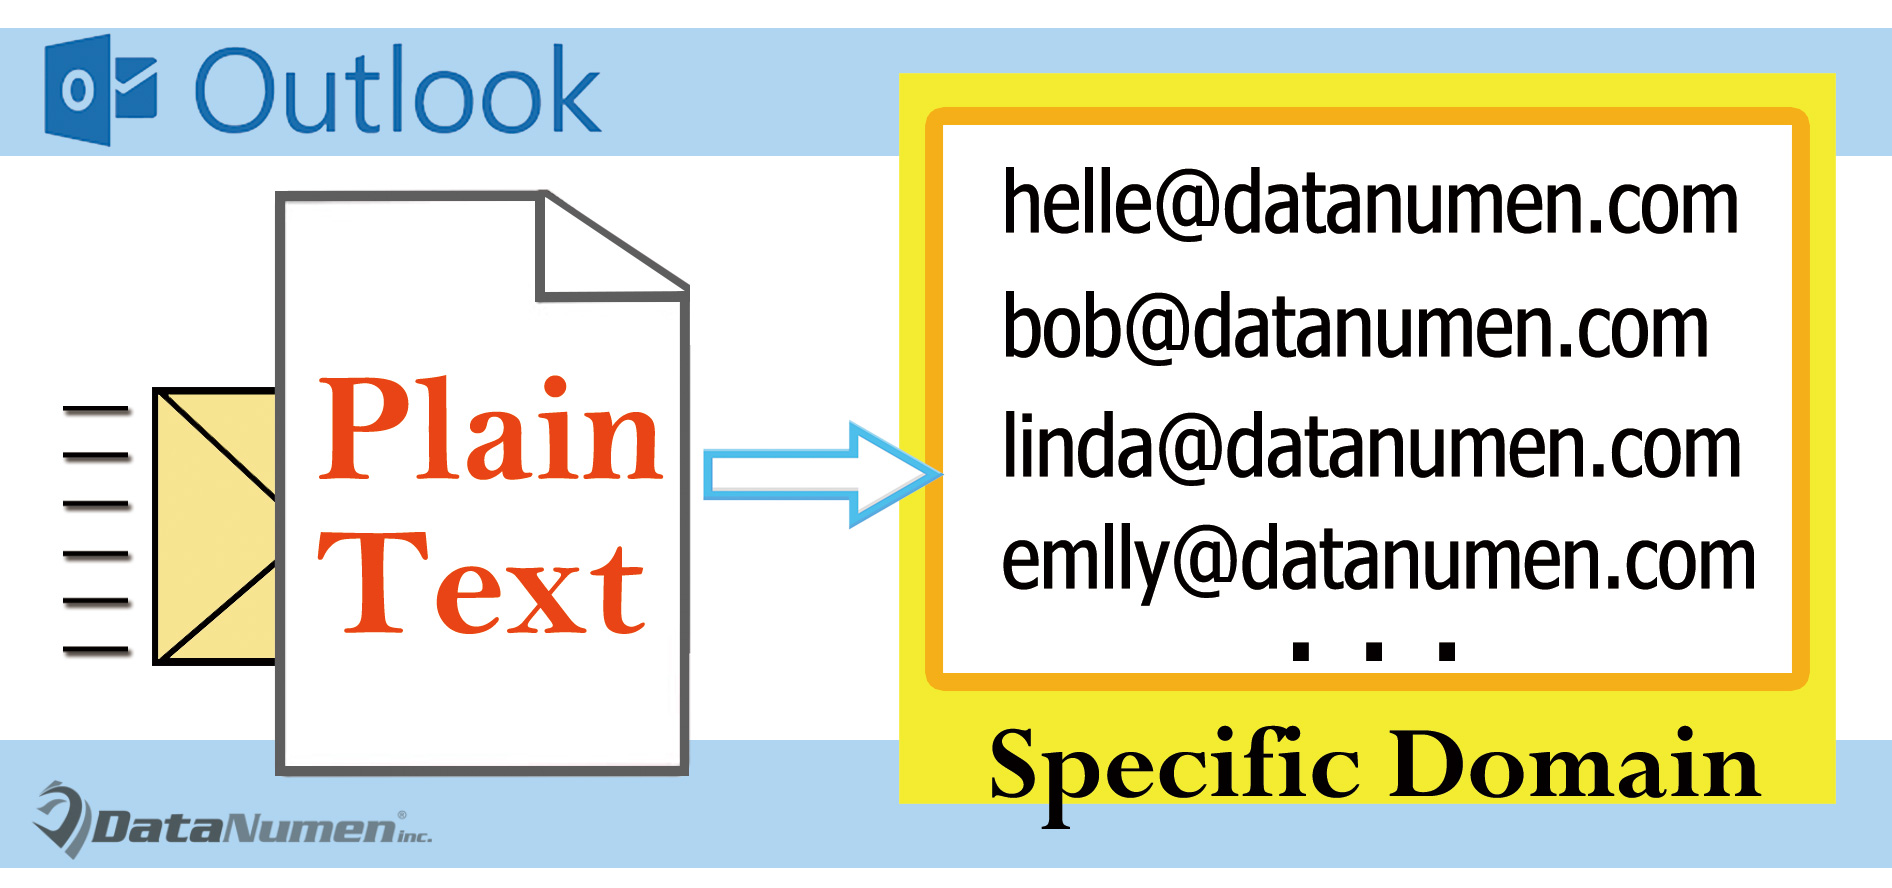 Send Plain Text Emails Only to Those in a Specific Domain via Outlook VBA